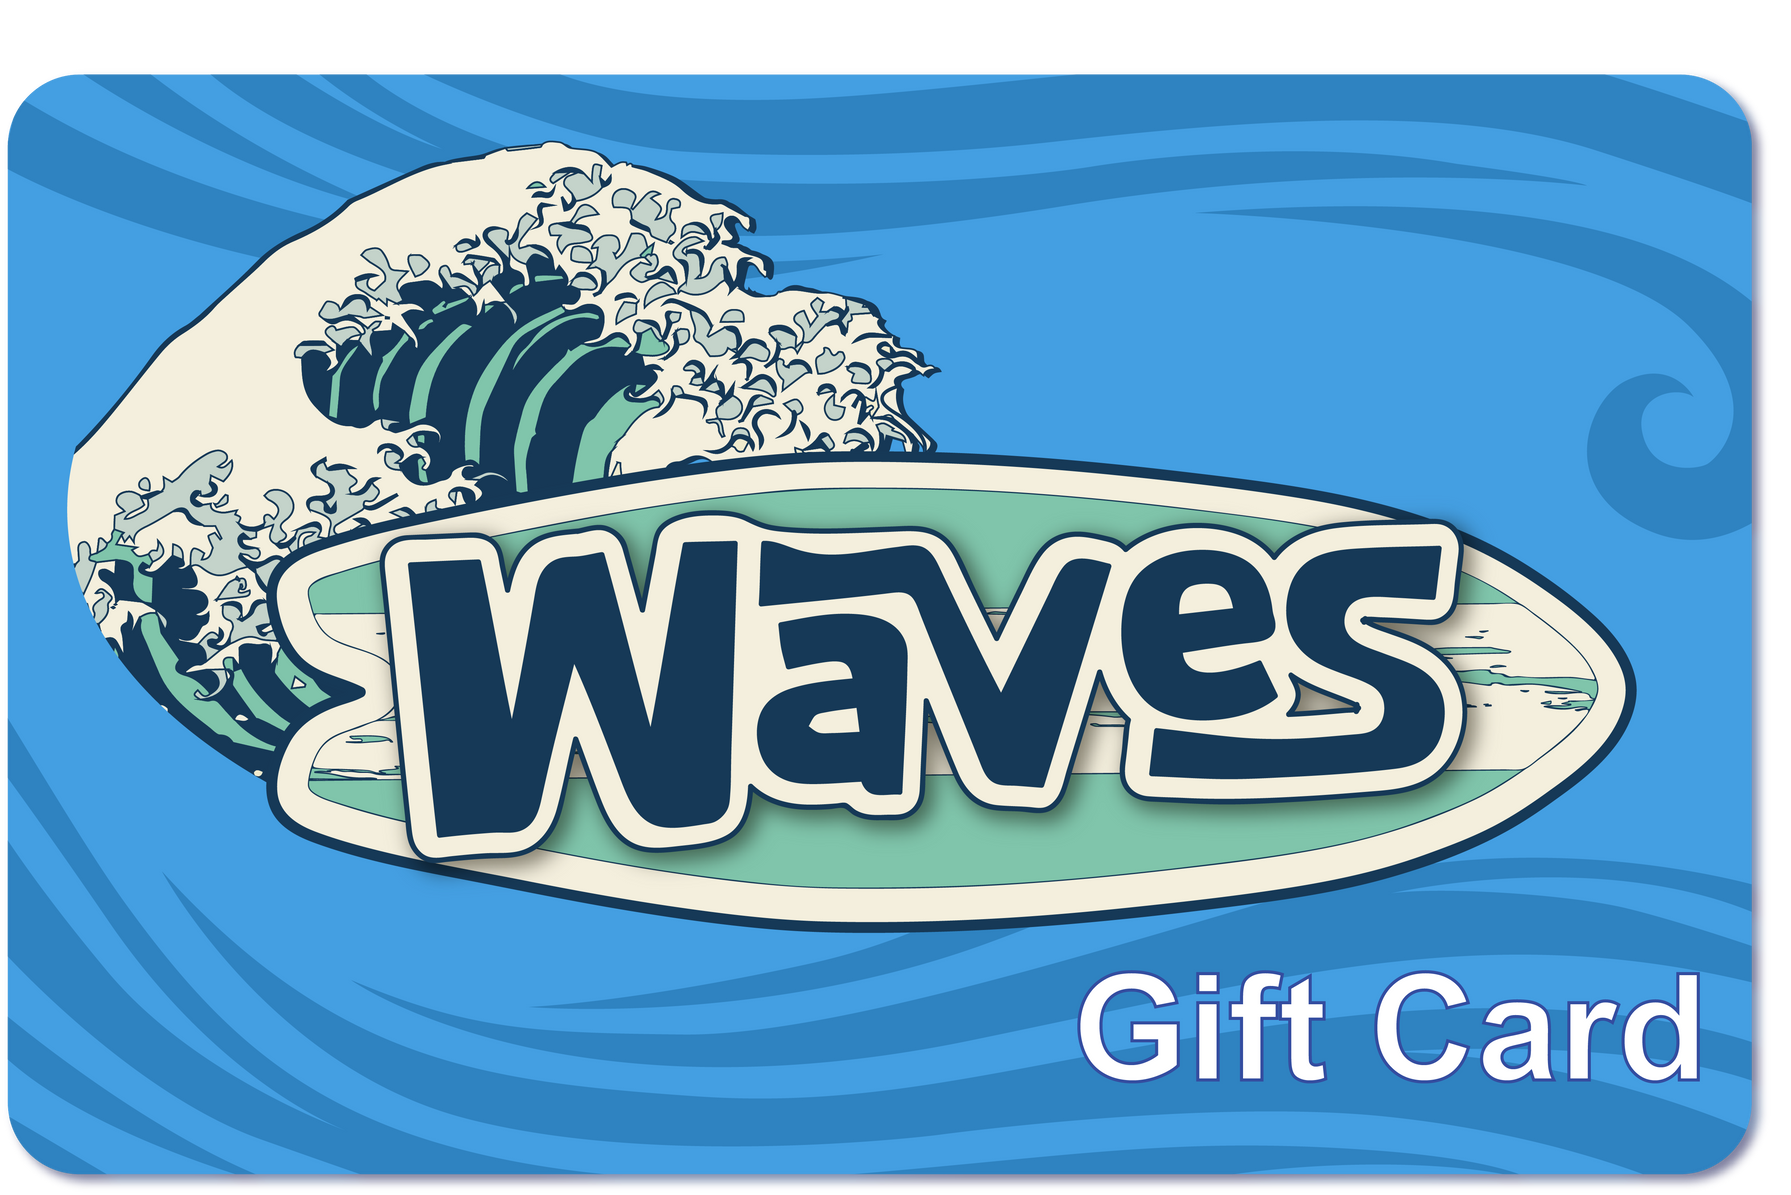 Waves car wash gift card - WAVES CAR WASH LOGO - VINTAGE SURFBOARD WITH THE WORD WAVES CAR WASH ON TOP